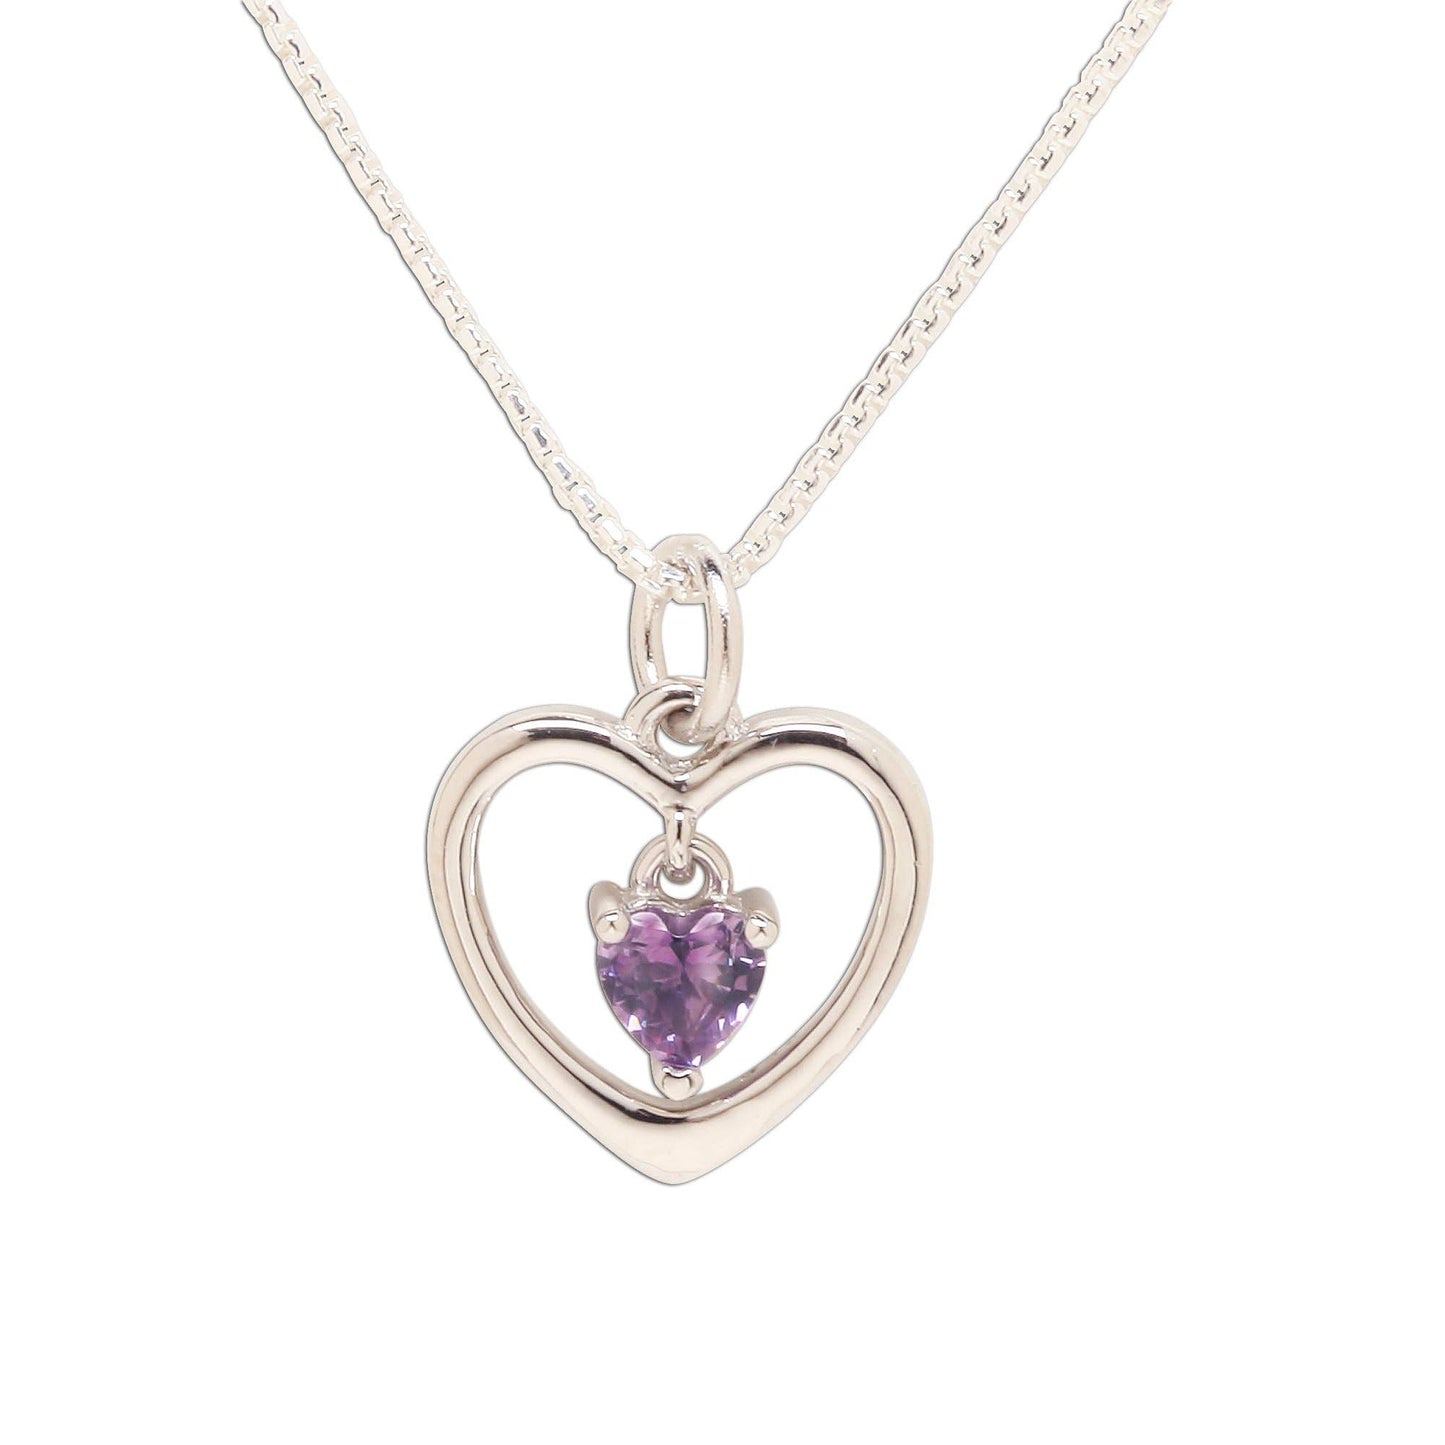 Cherished Moments - Sterling Silver Birthstone Dancing Heart Necklace for Kids